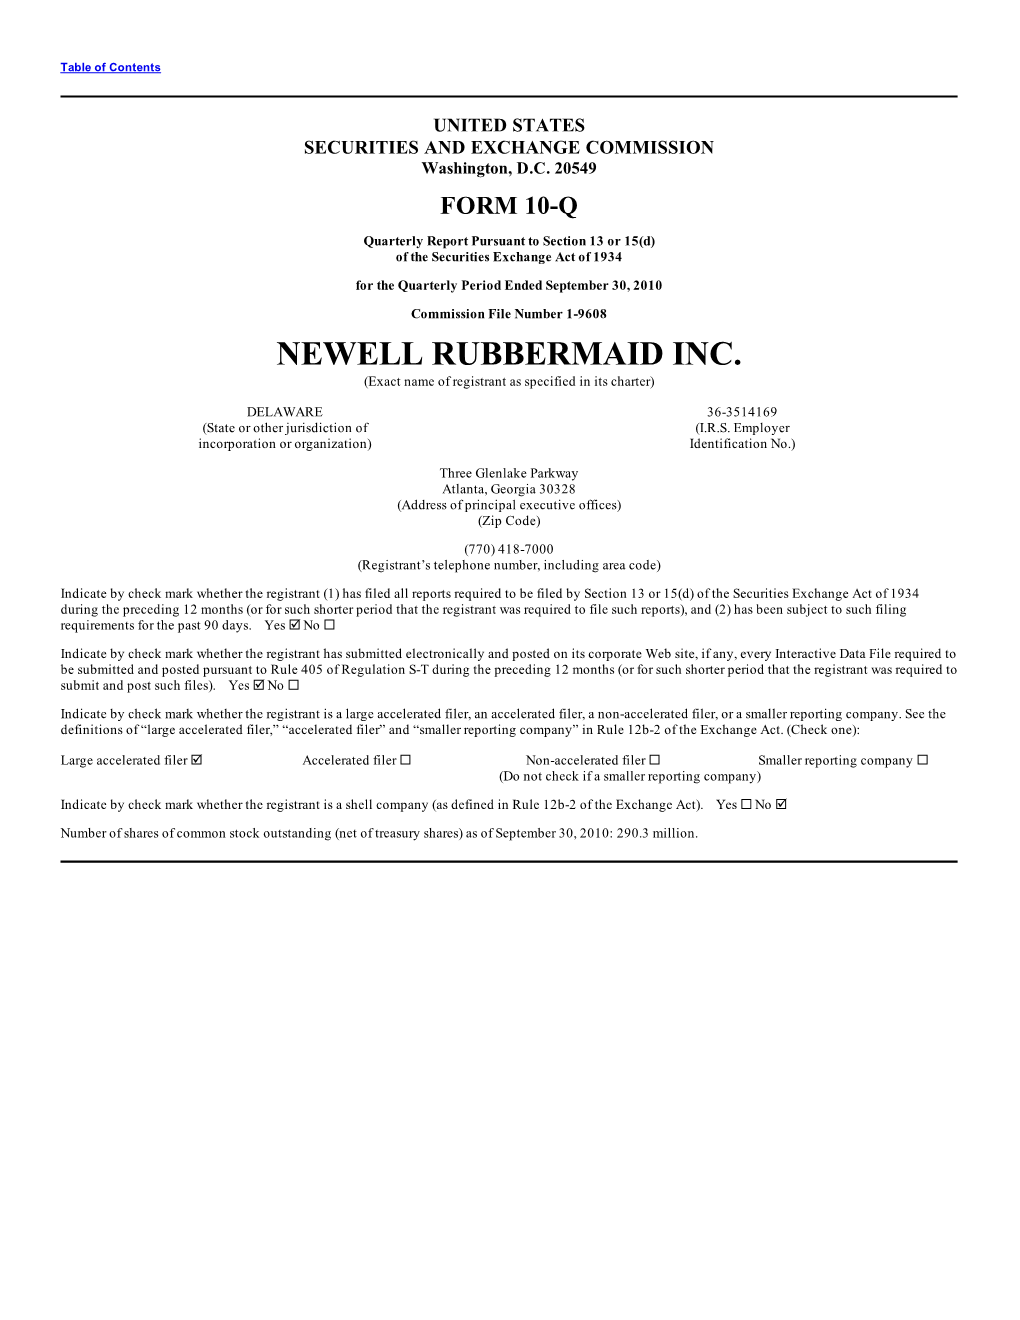 NEWELL RUBBERMAID INC. (Exact Name of Registrant As Specified in Its Charter)